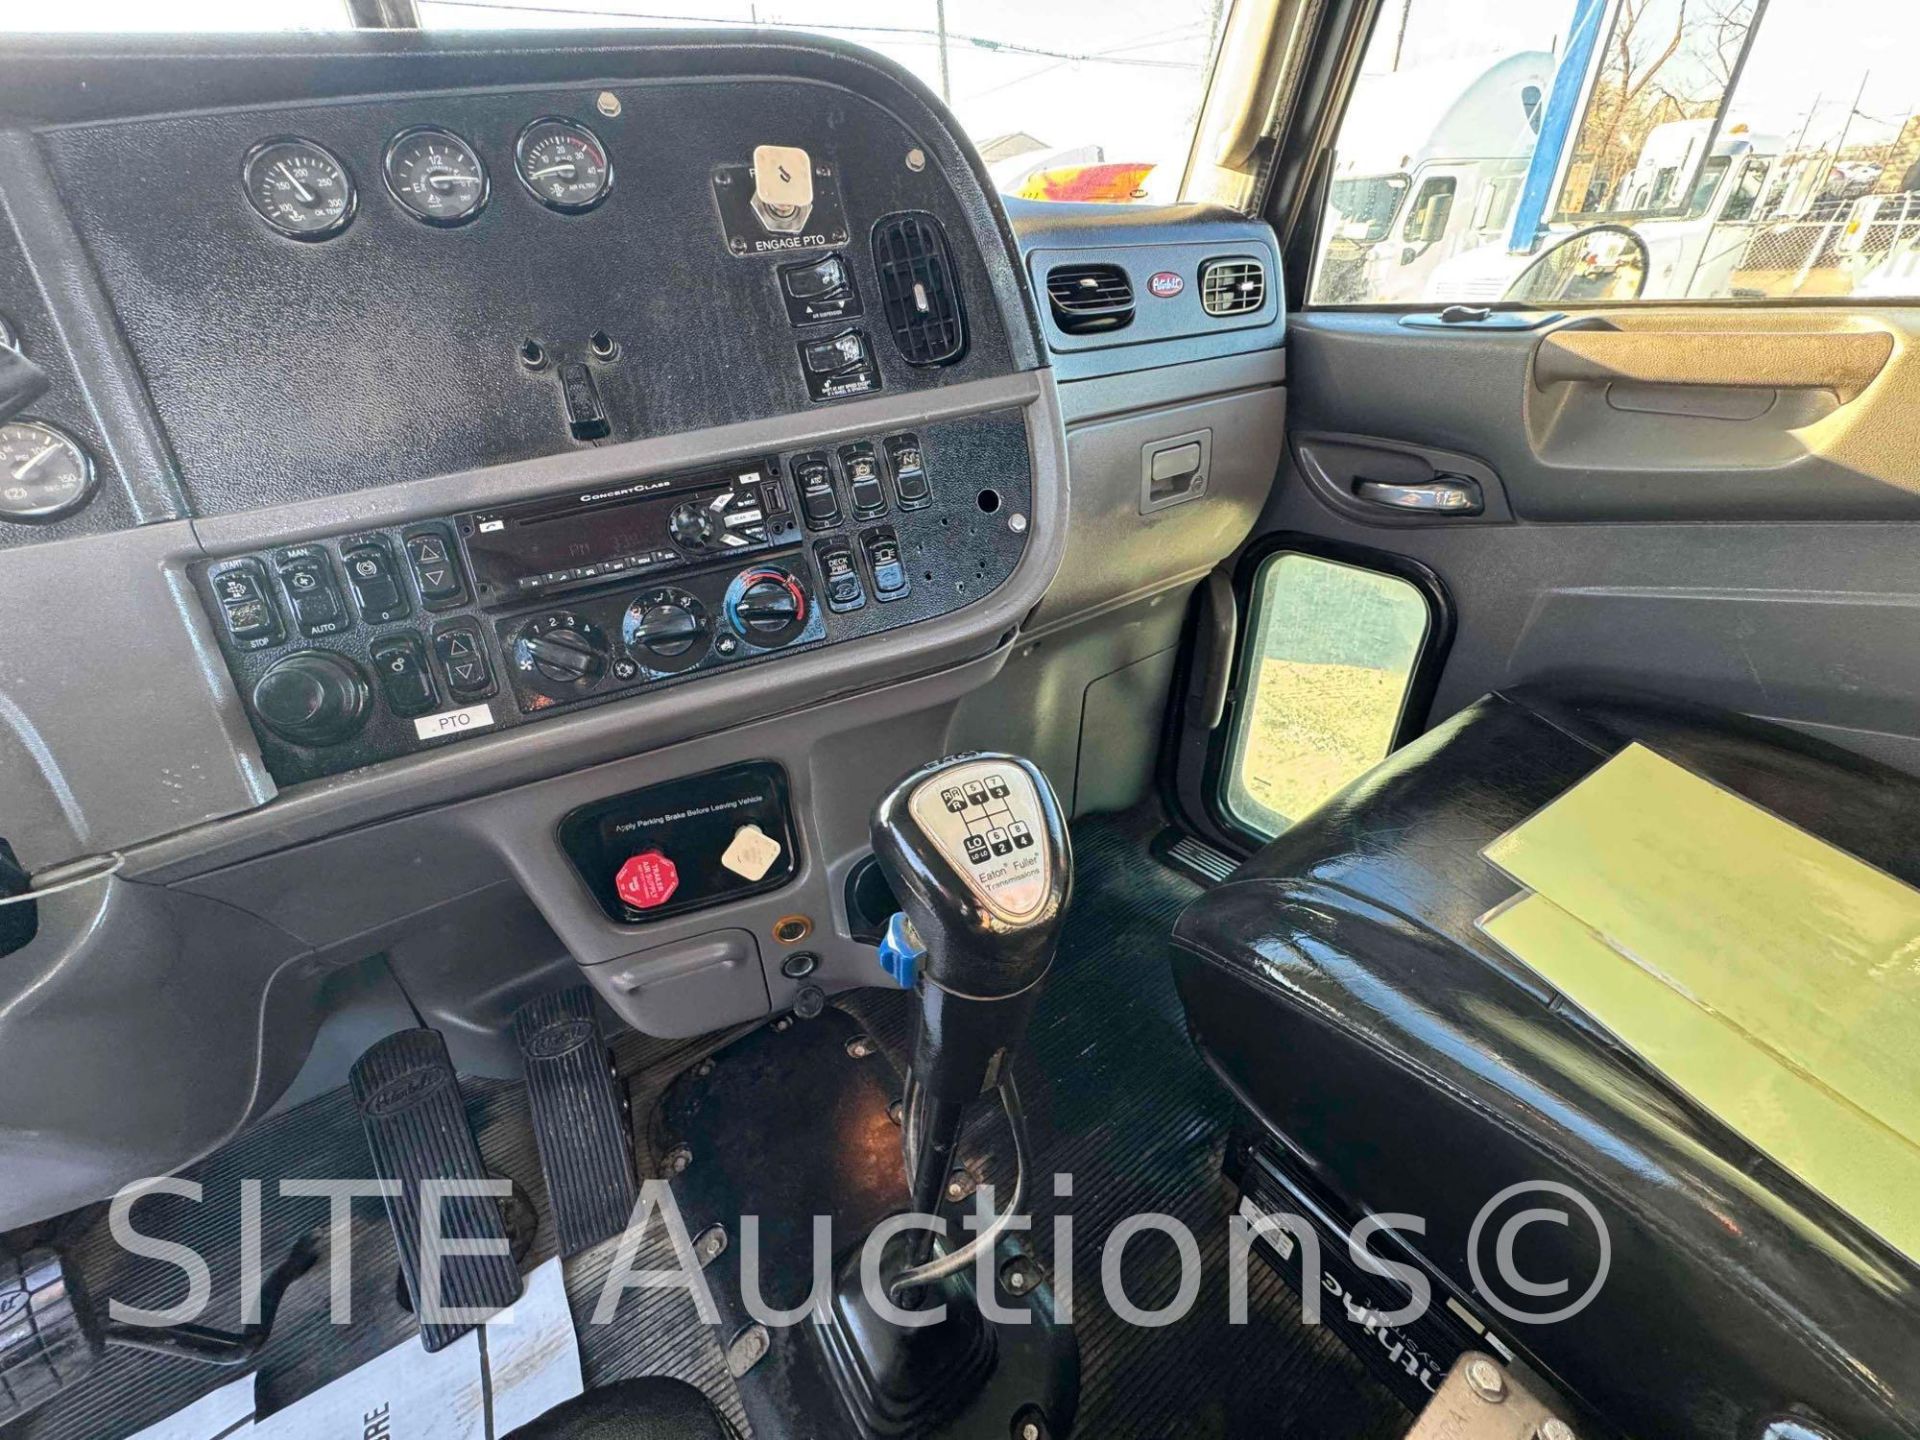 2012 Peterbilt 365 T/A Daycab Truck Tractor - Image 14 of 19